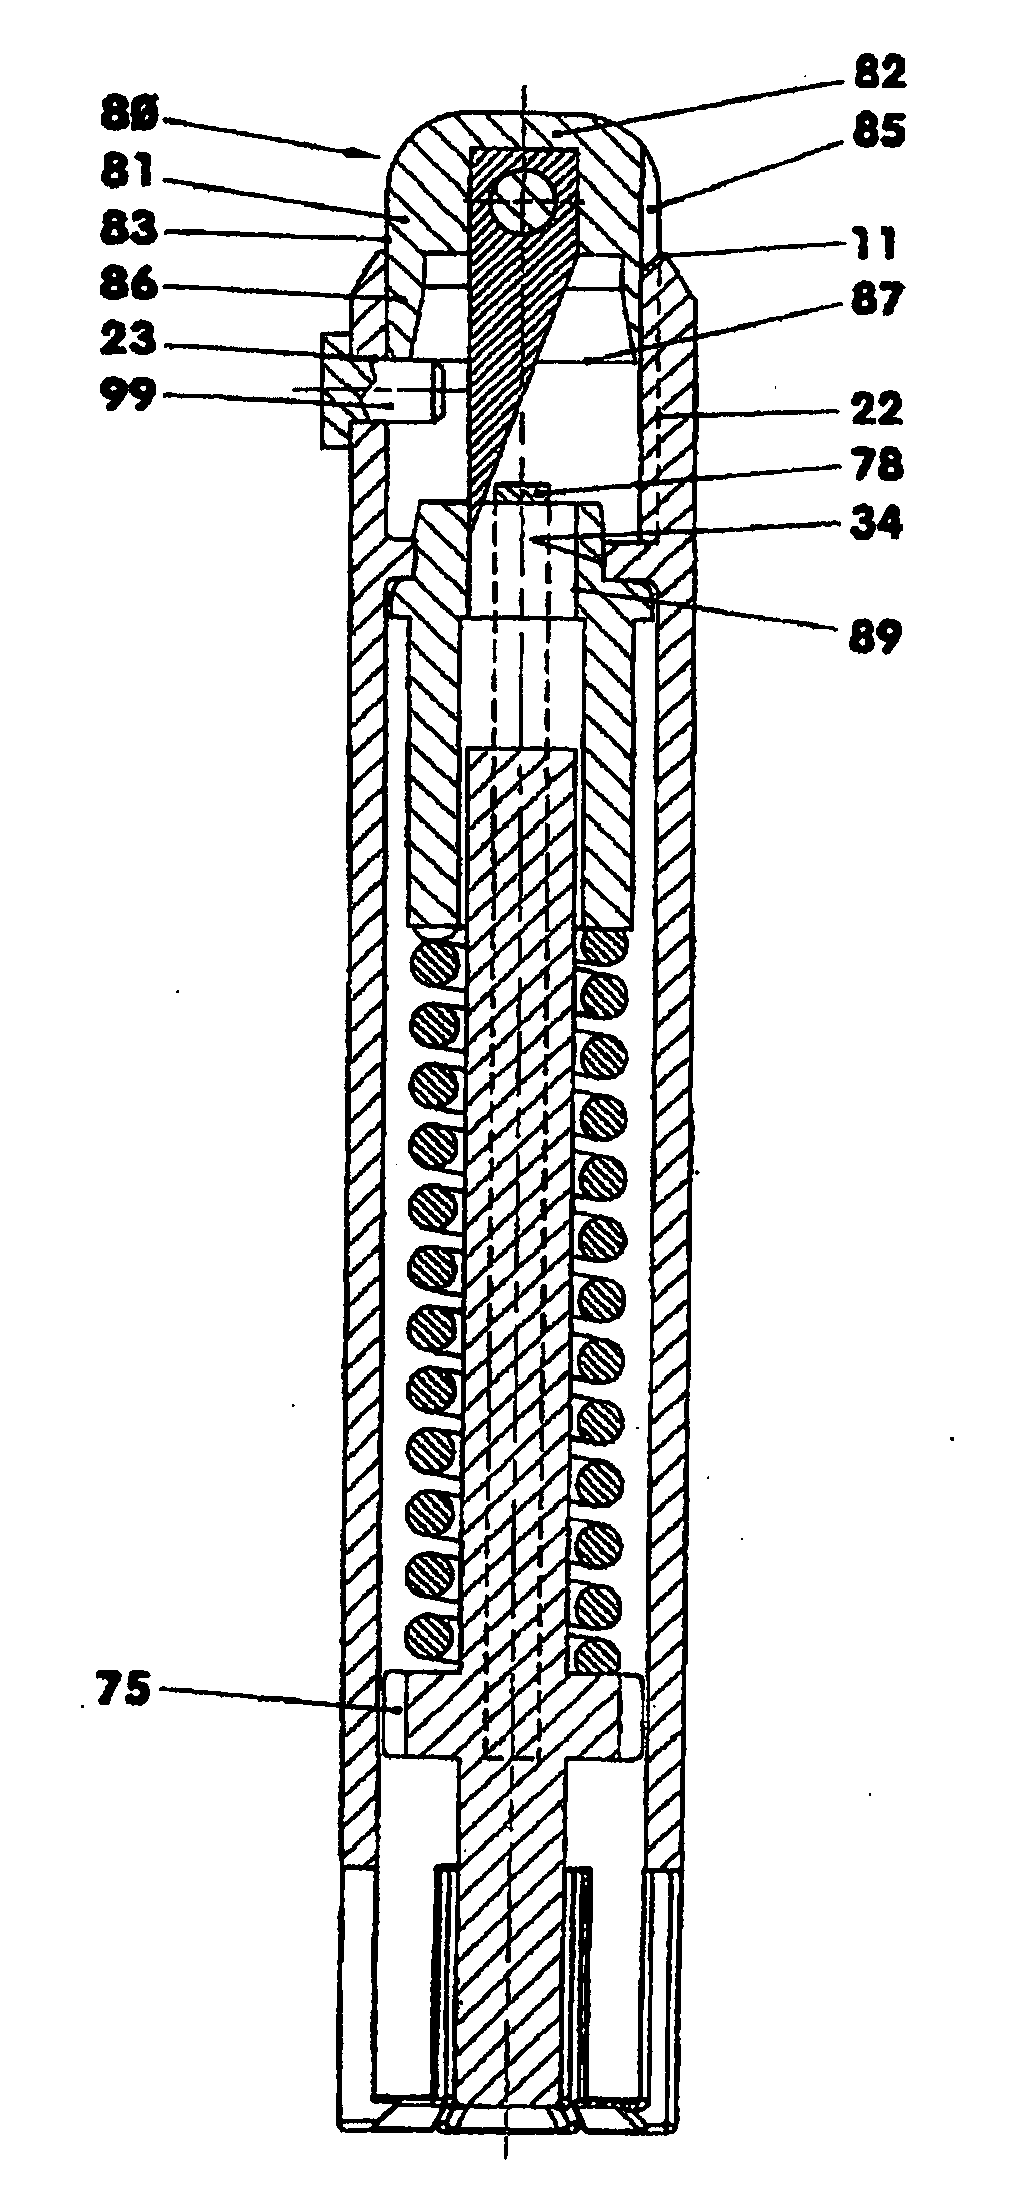 One-way injector with continuously charged spring energy store